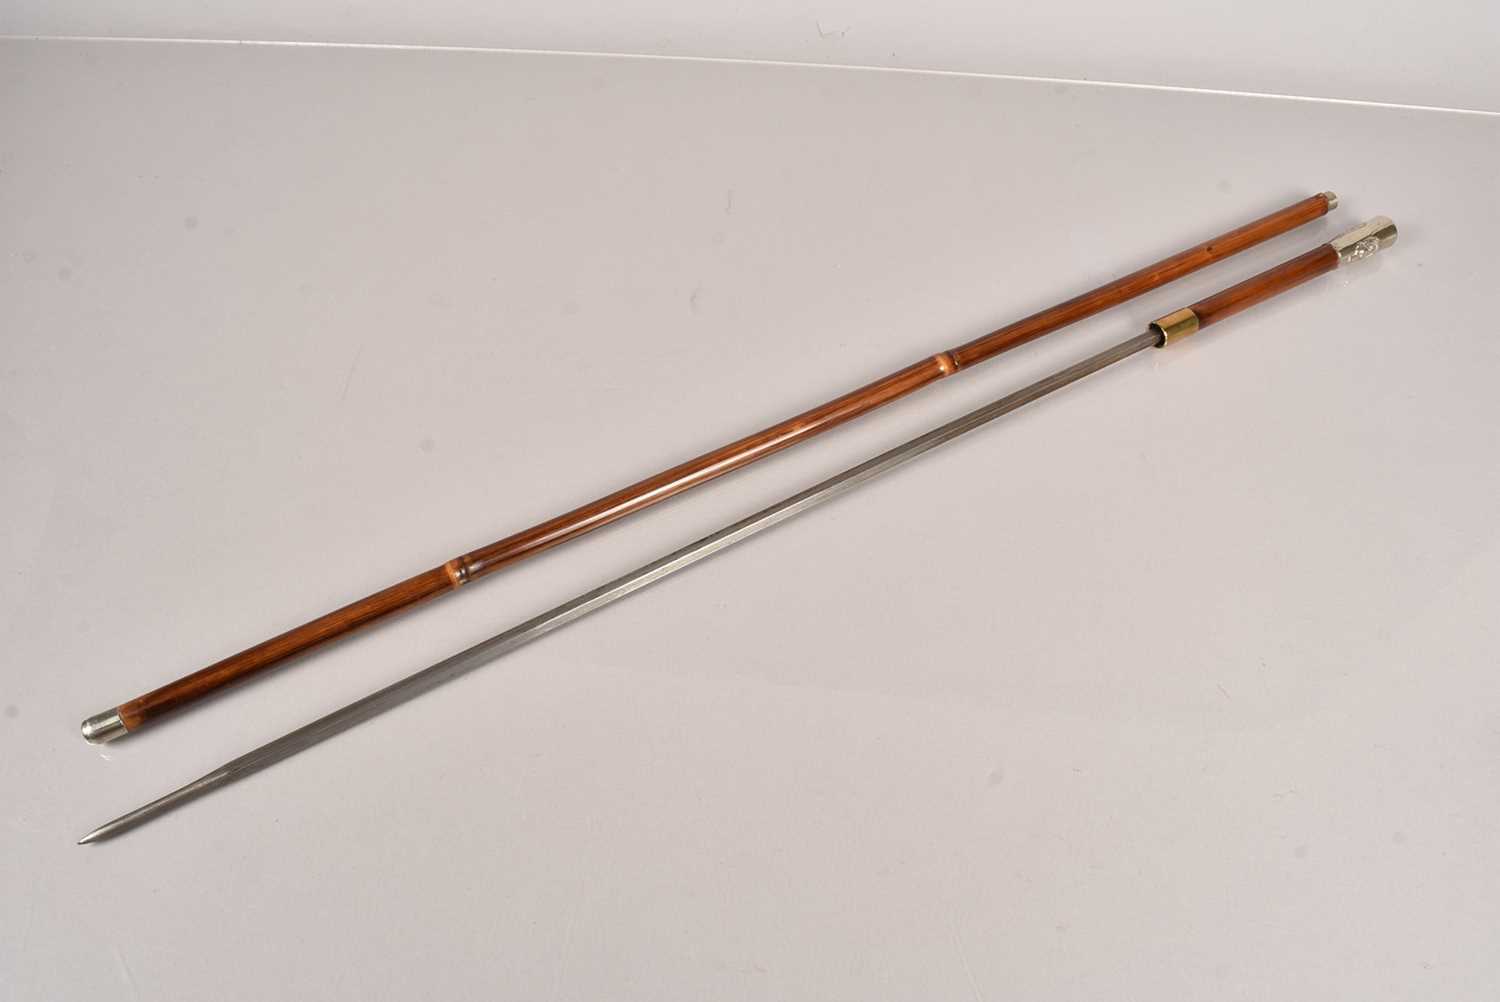 An Honourable Artillery Company (HAC) white metal topped swagger sword stick, - Image 6 of 6